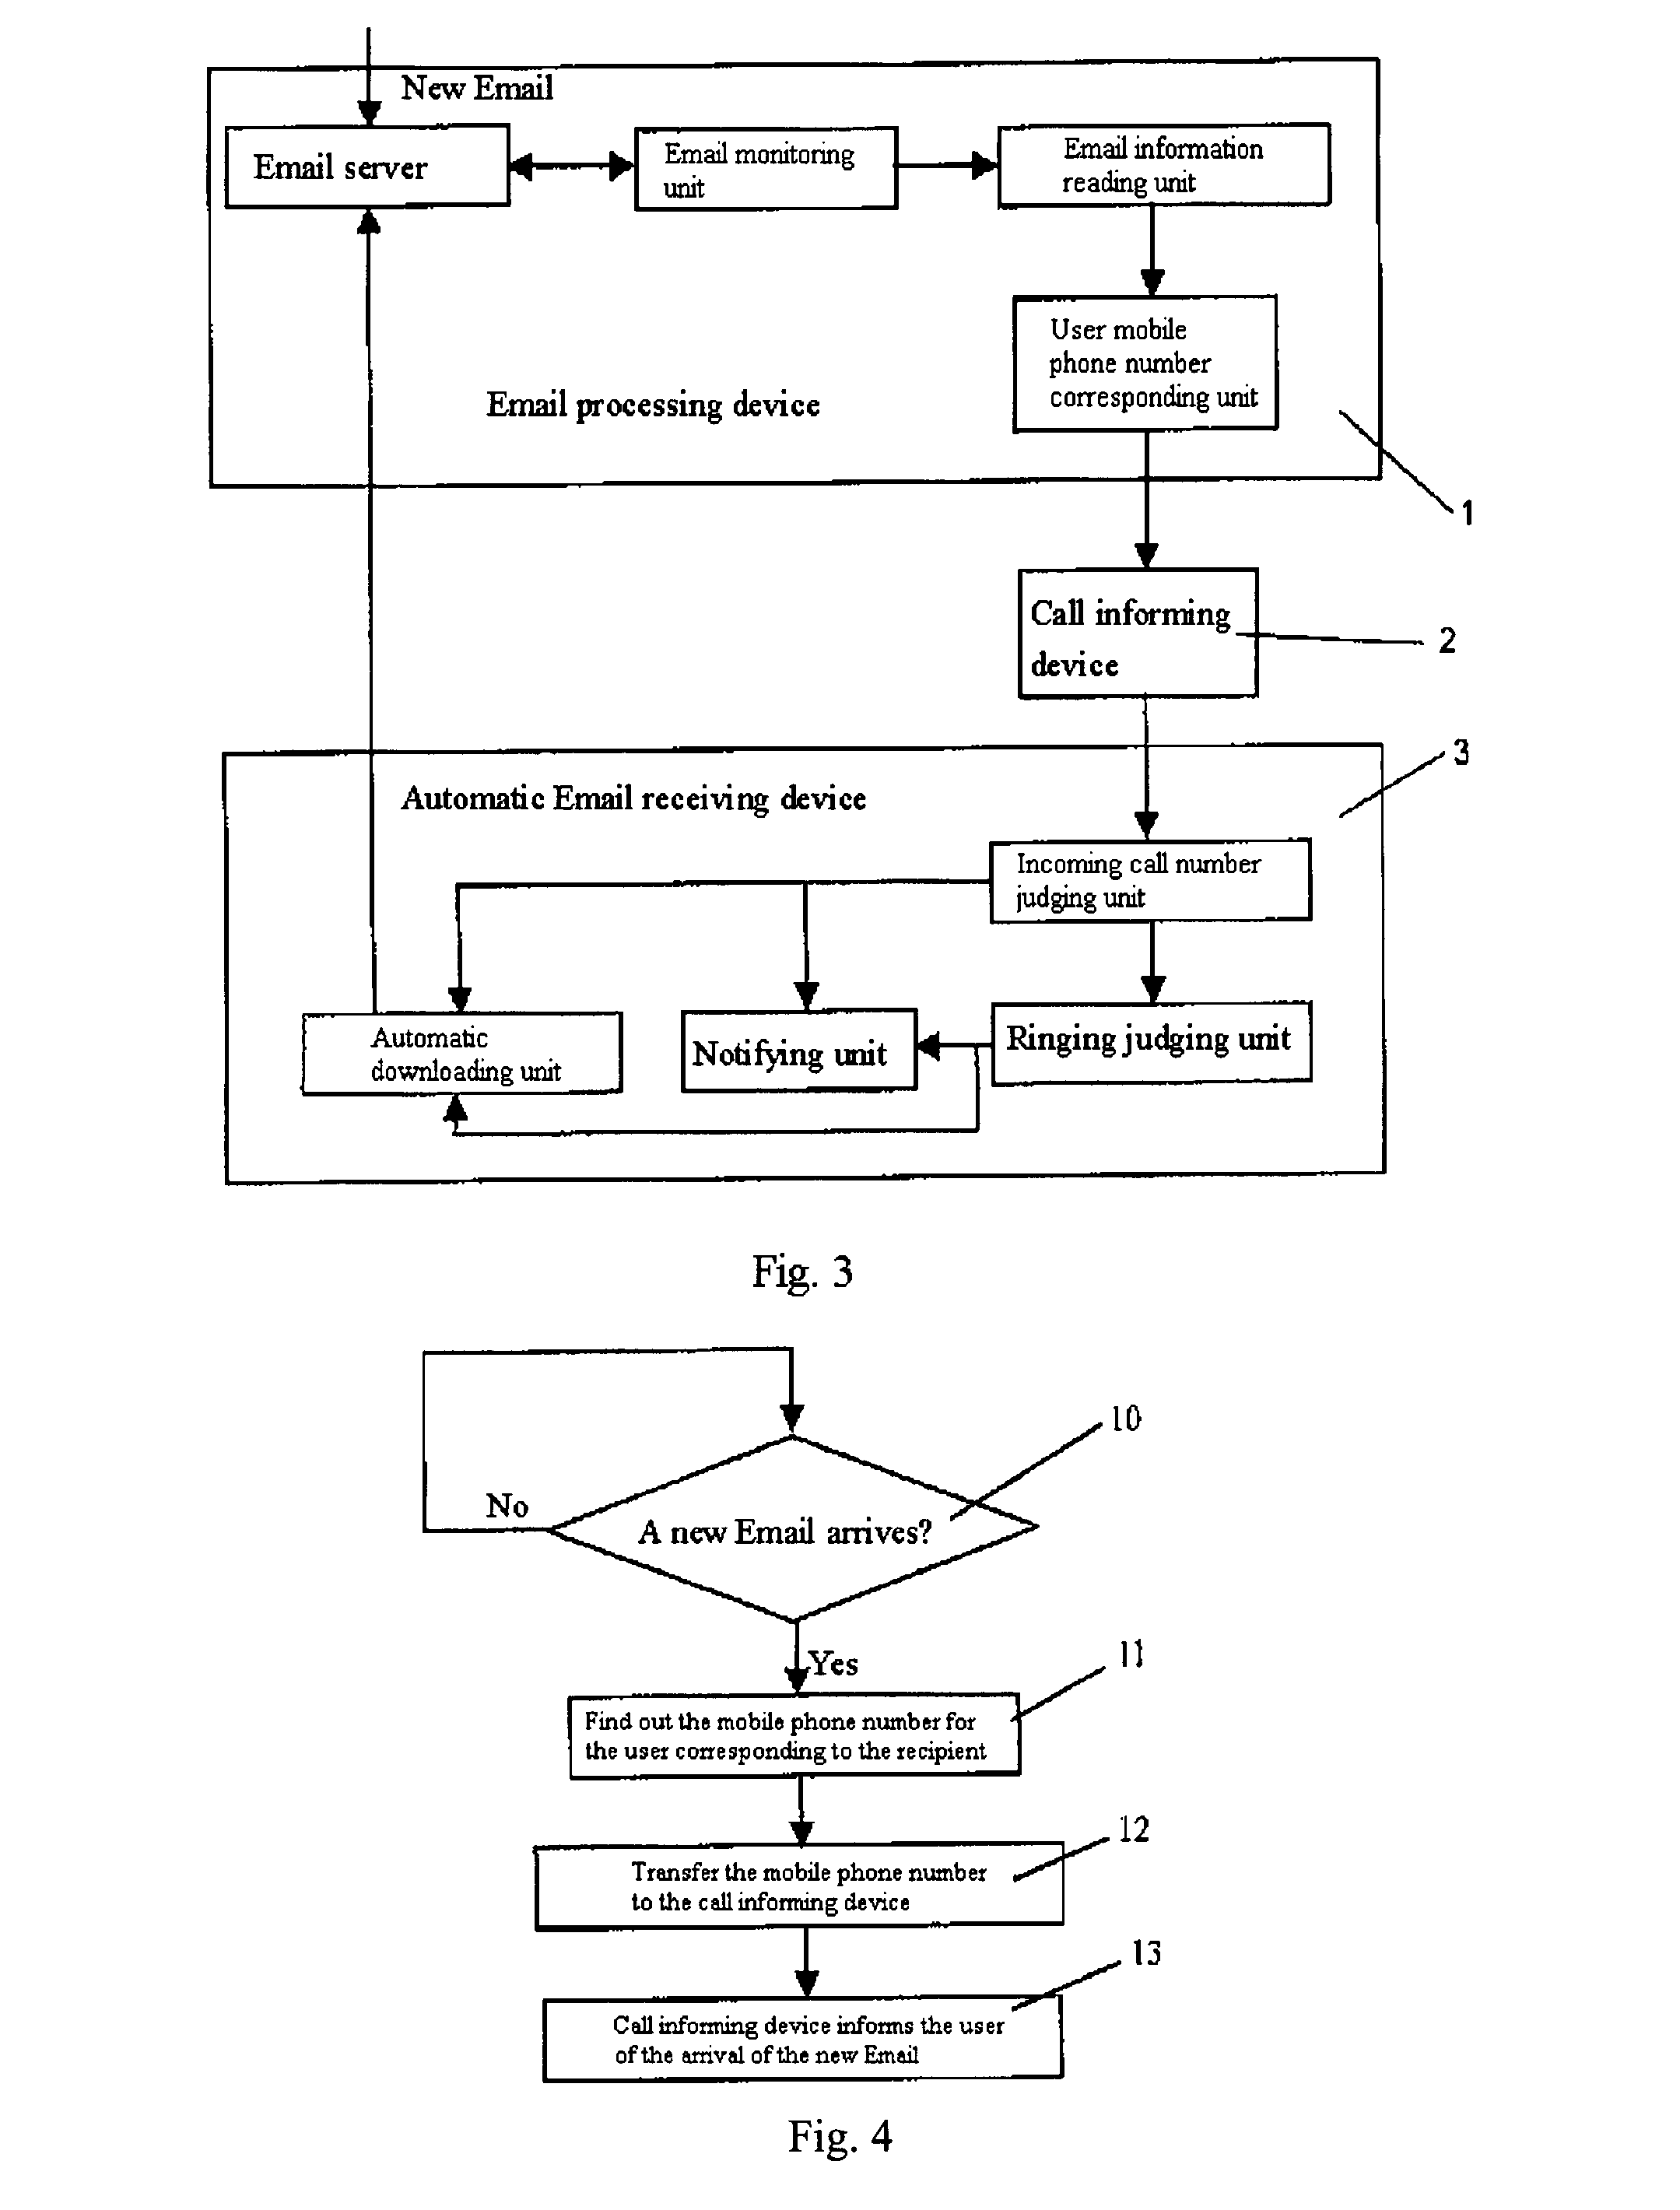 System and method for informing a user of the arrival of an email at an email server via mobile phone